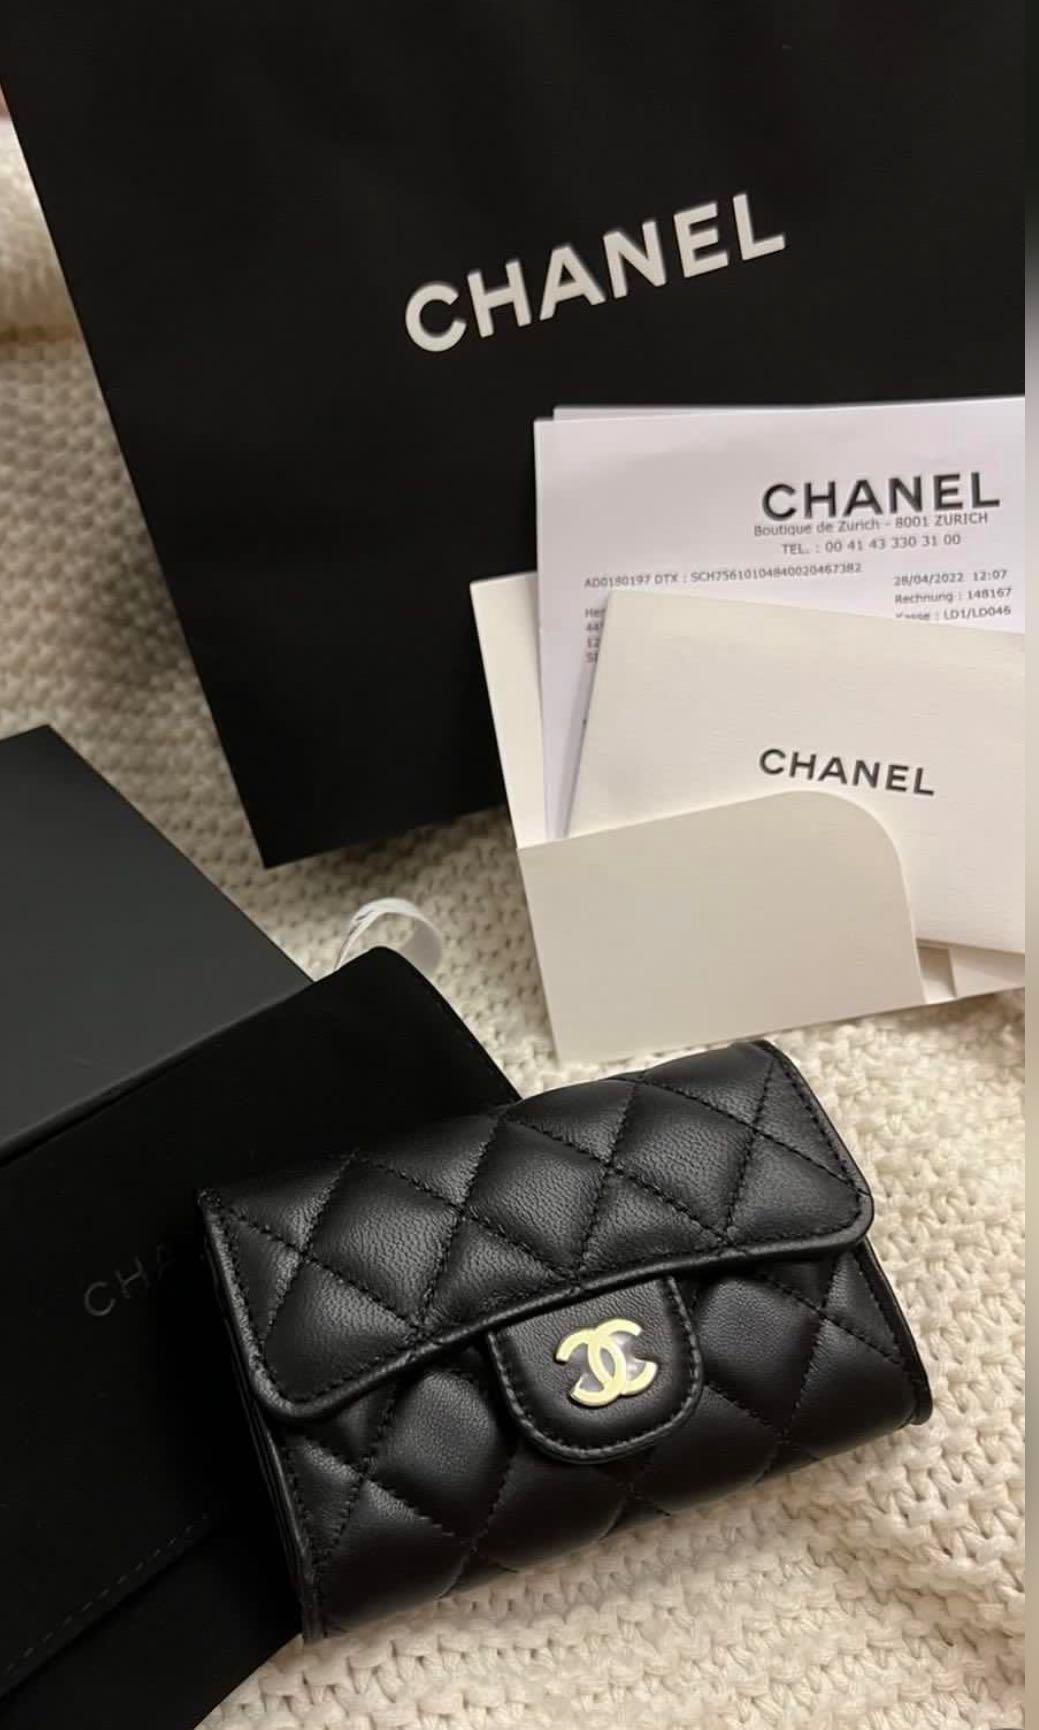 ❌SOLD❌ Chanel Black Classic Flap Card Holder GHW  Chanel card holder,  Chanel black classic, Chanel bag